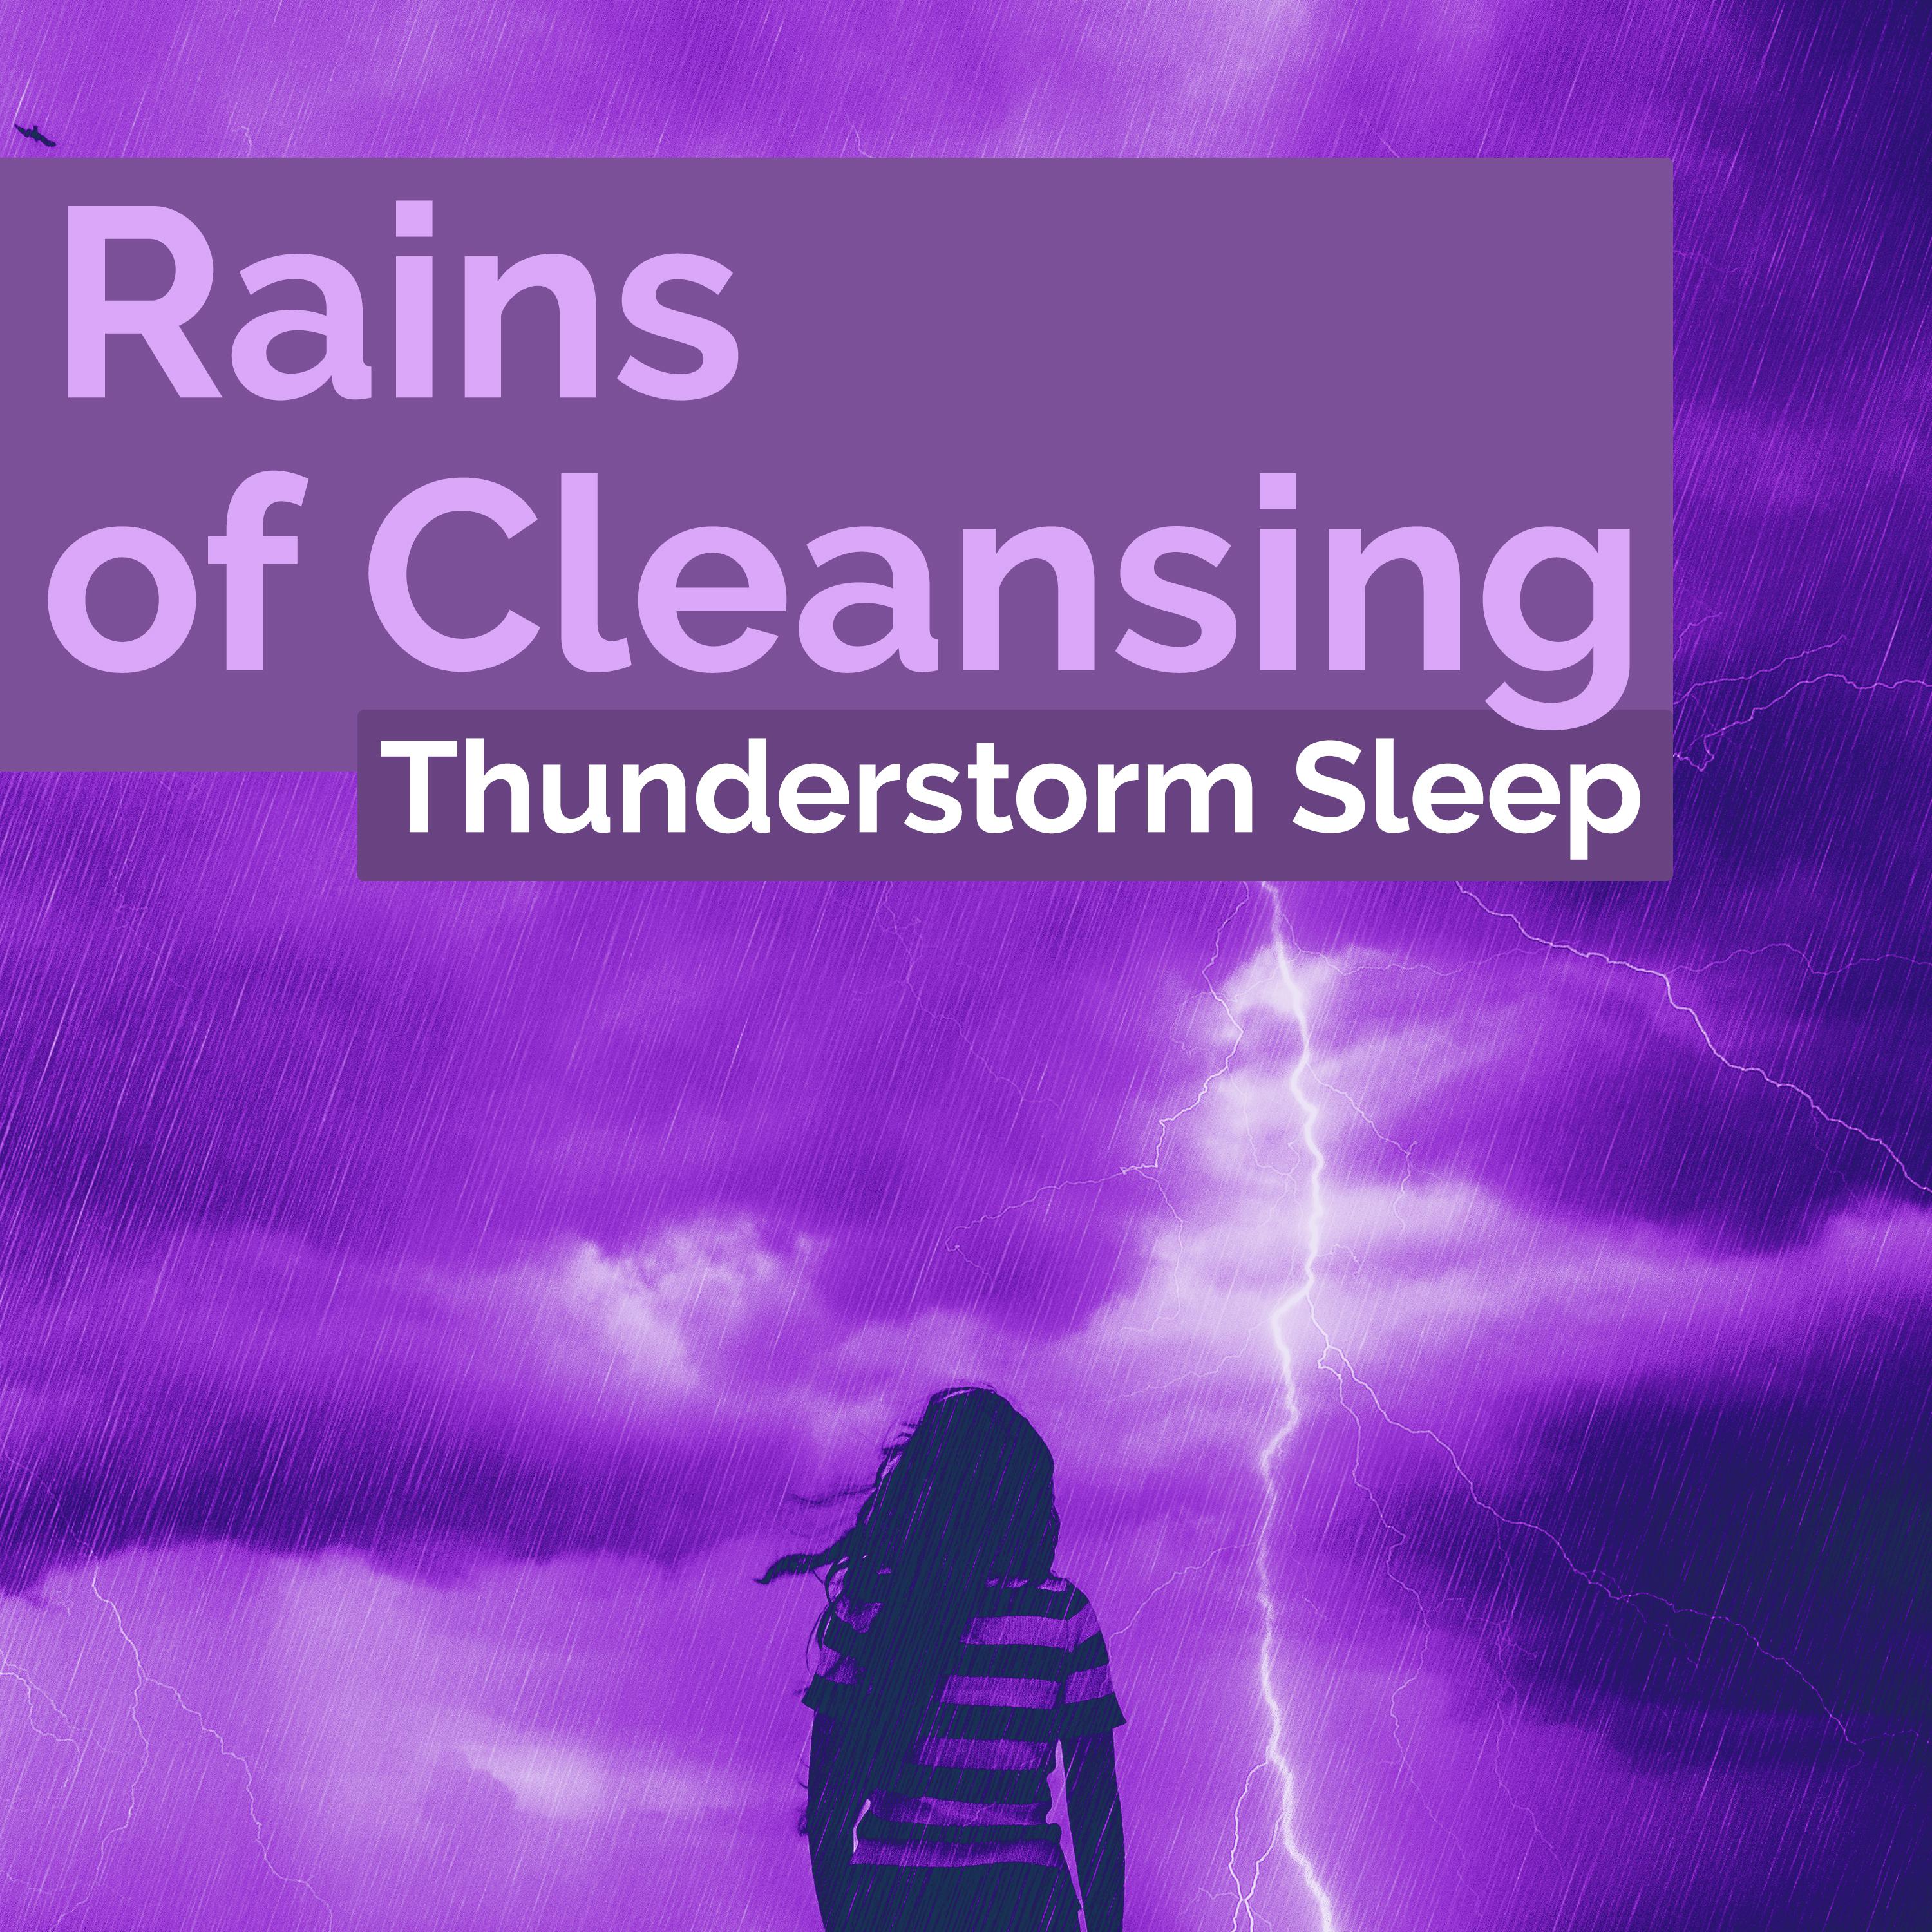 Rains of Cleansing